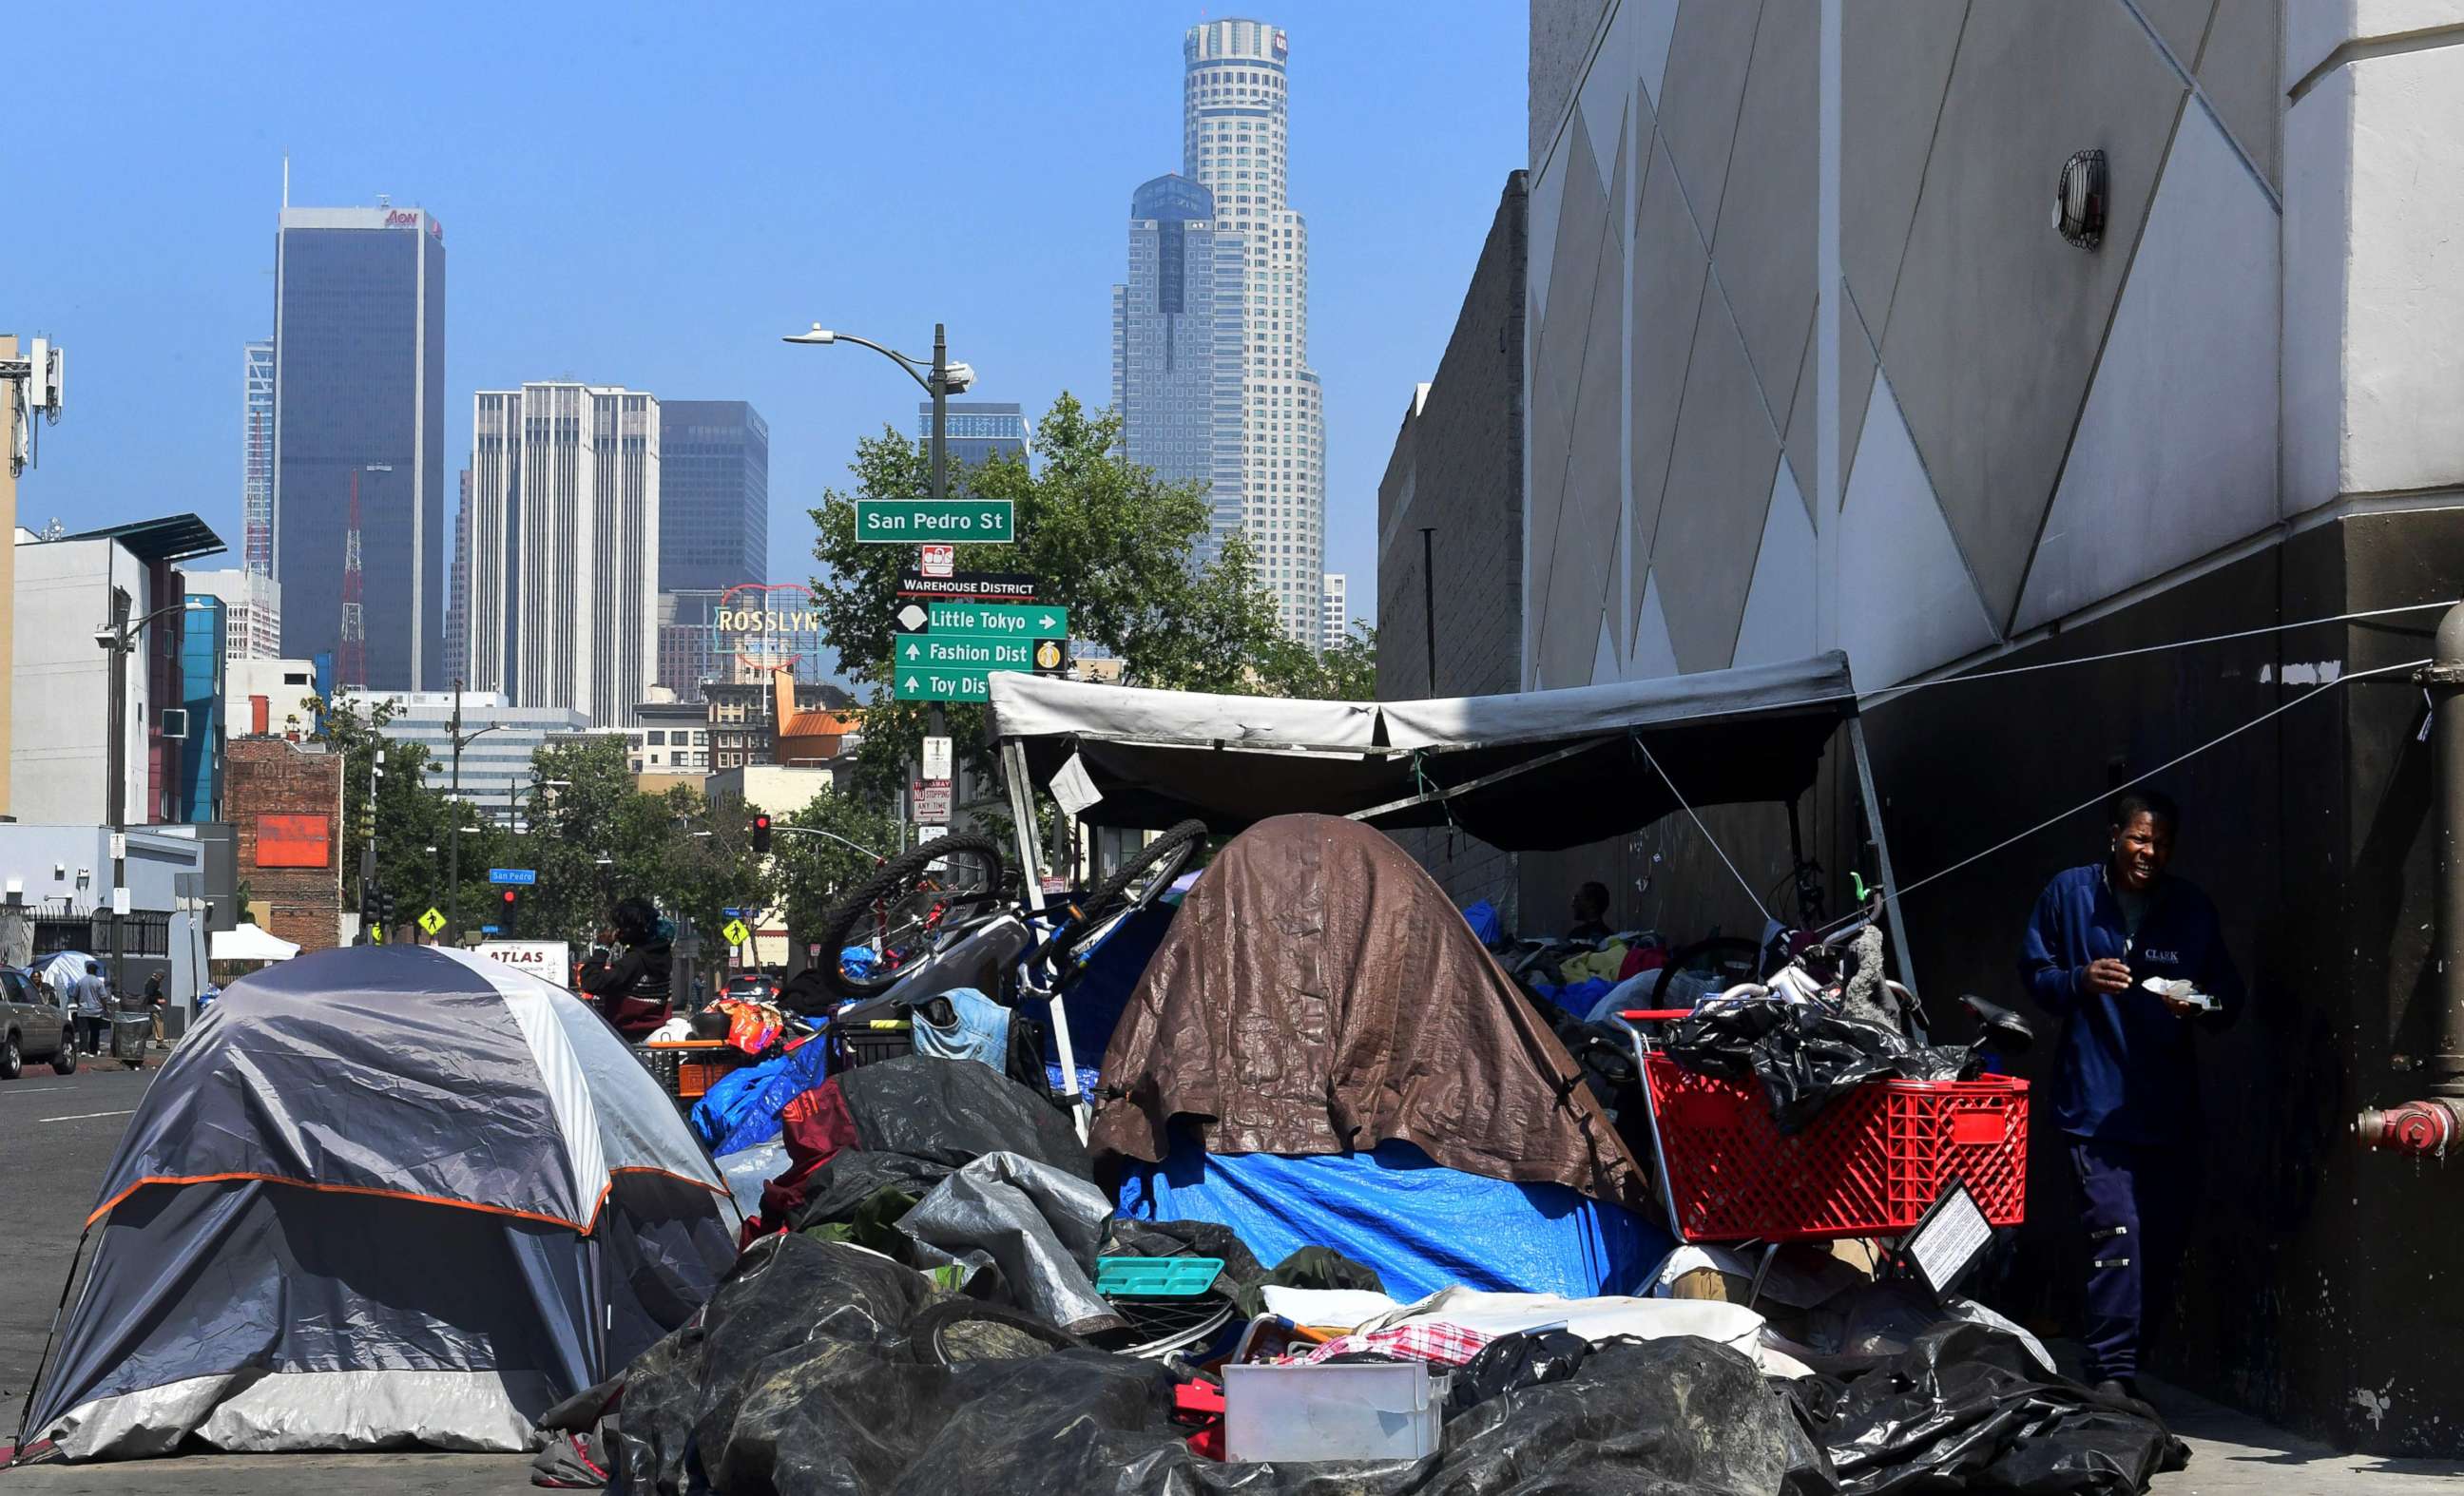 PHOTO: Belongings of the homeless crowd a downtown Los Angeles sidewalk, May 30, 2019. 